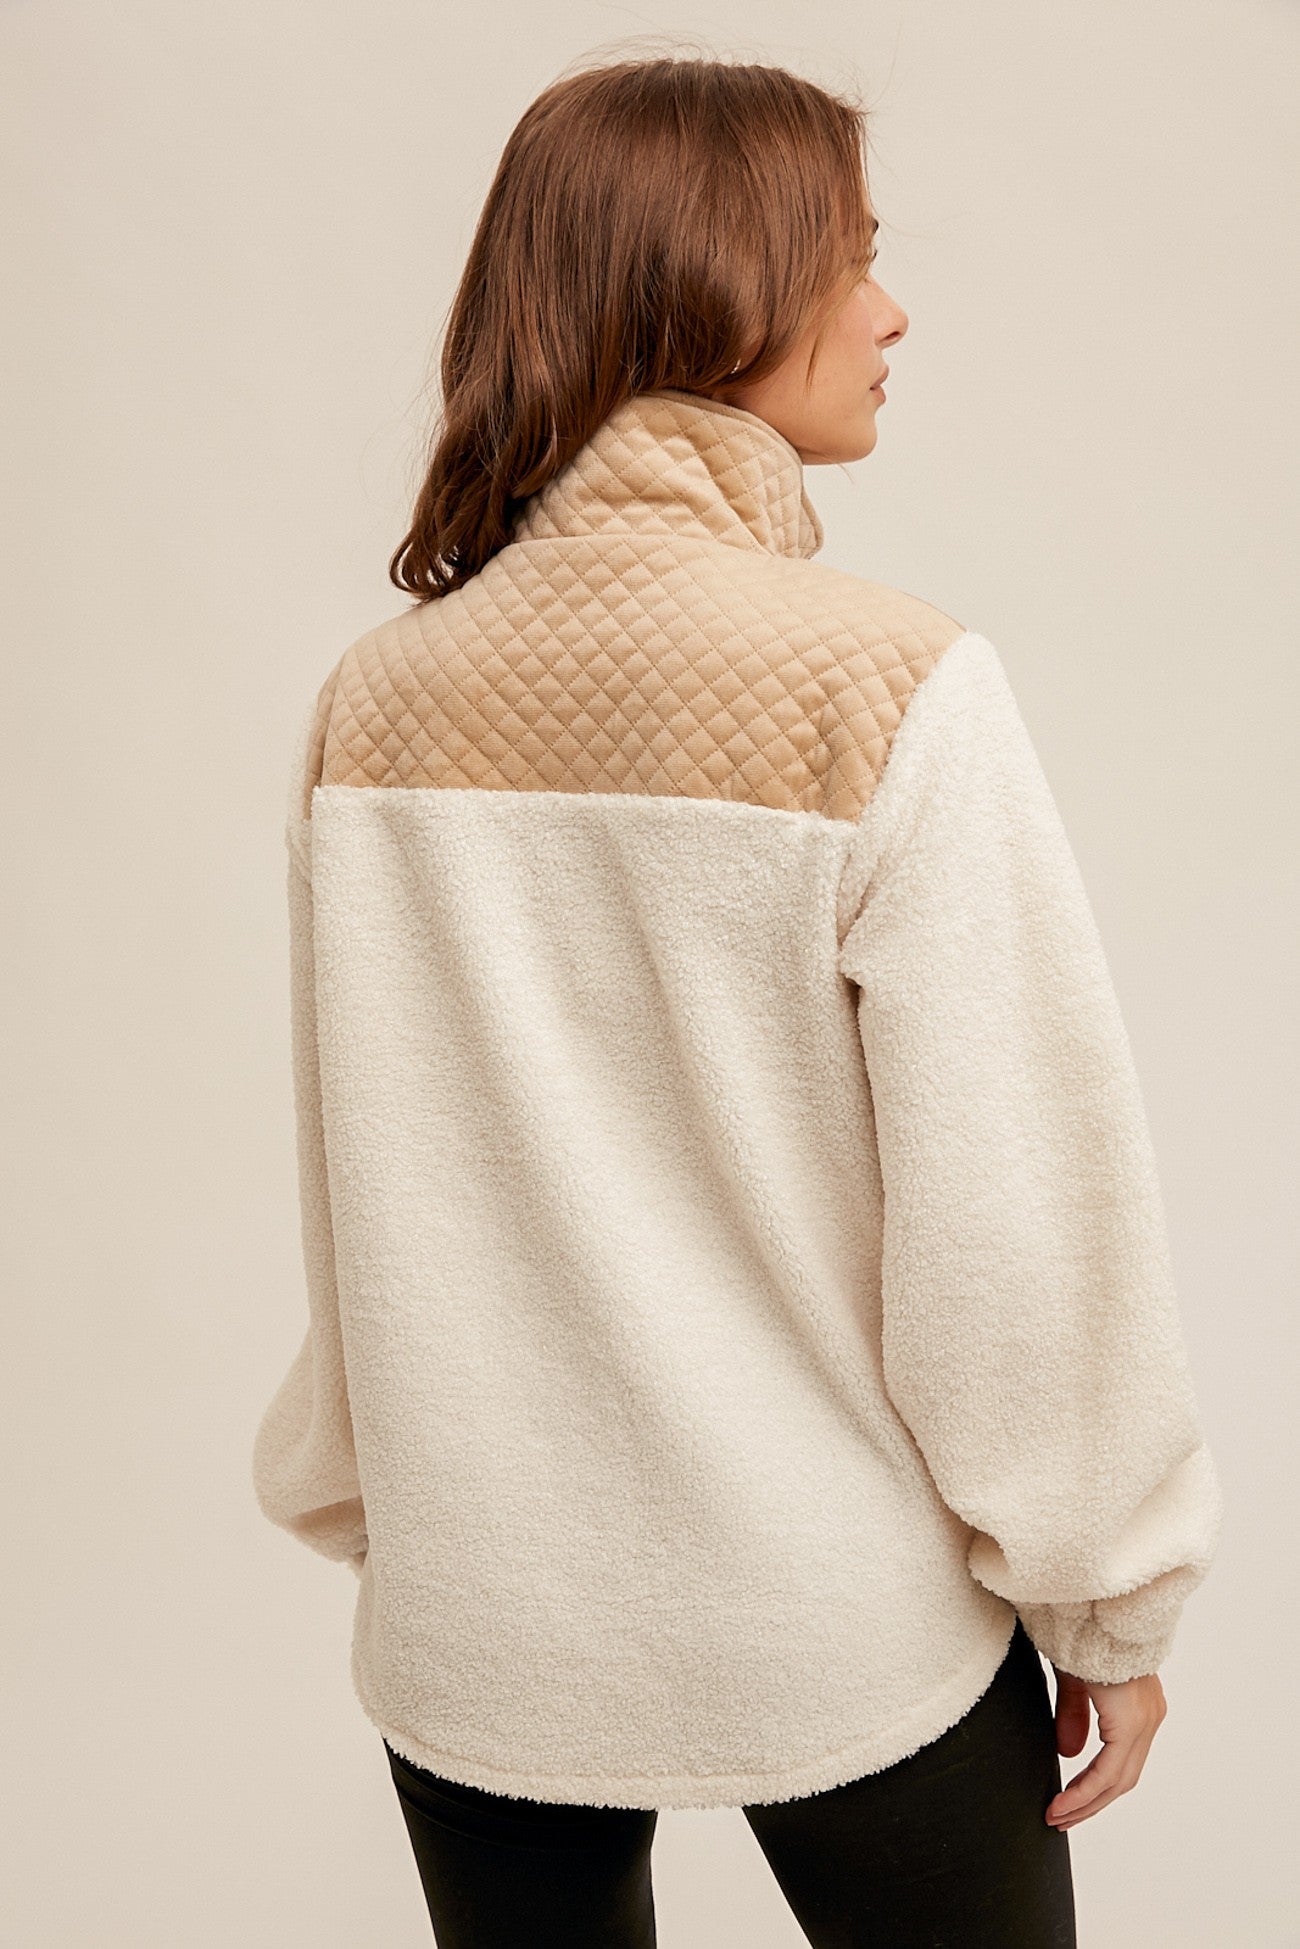 Quilted Velvet Detailed Zipup Sherpa Pullover - Storm and Sky Shoppe